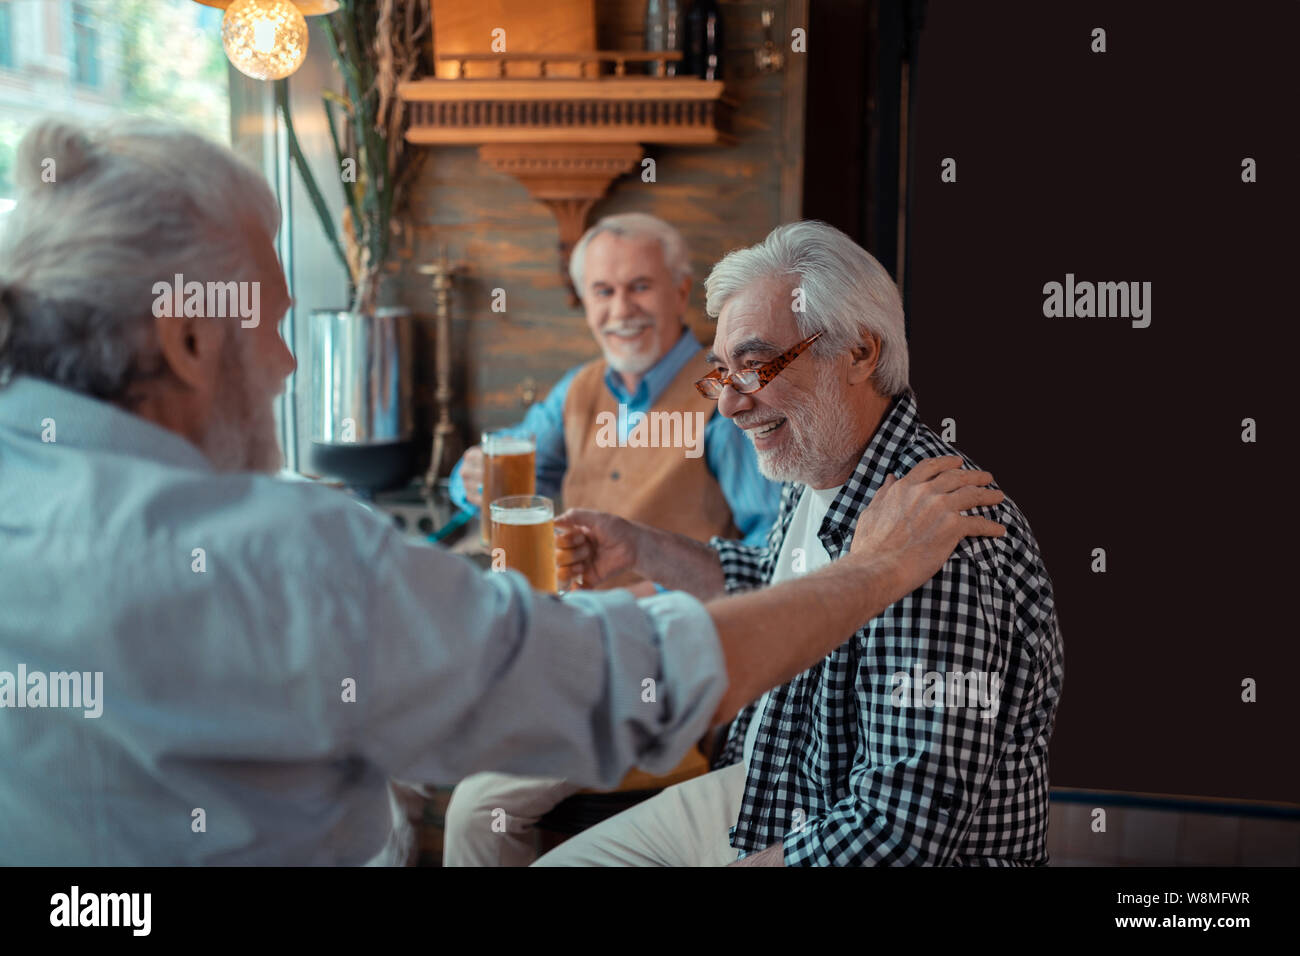 Old friend touching shoulder of man while drinking beer together Stock Photo